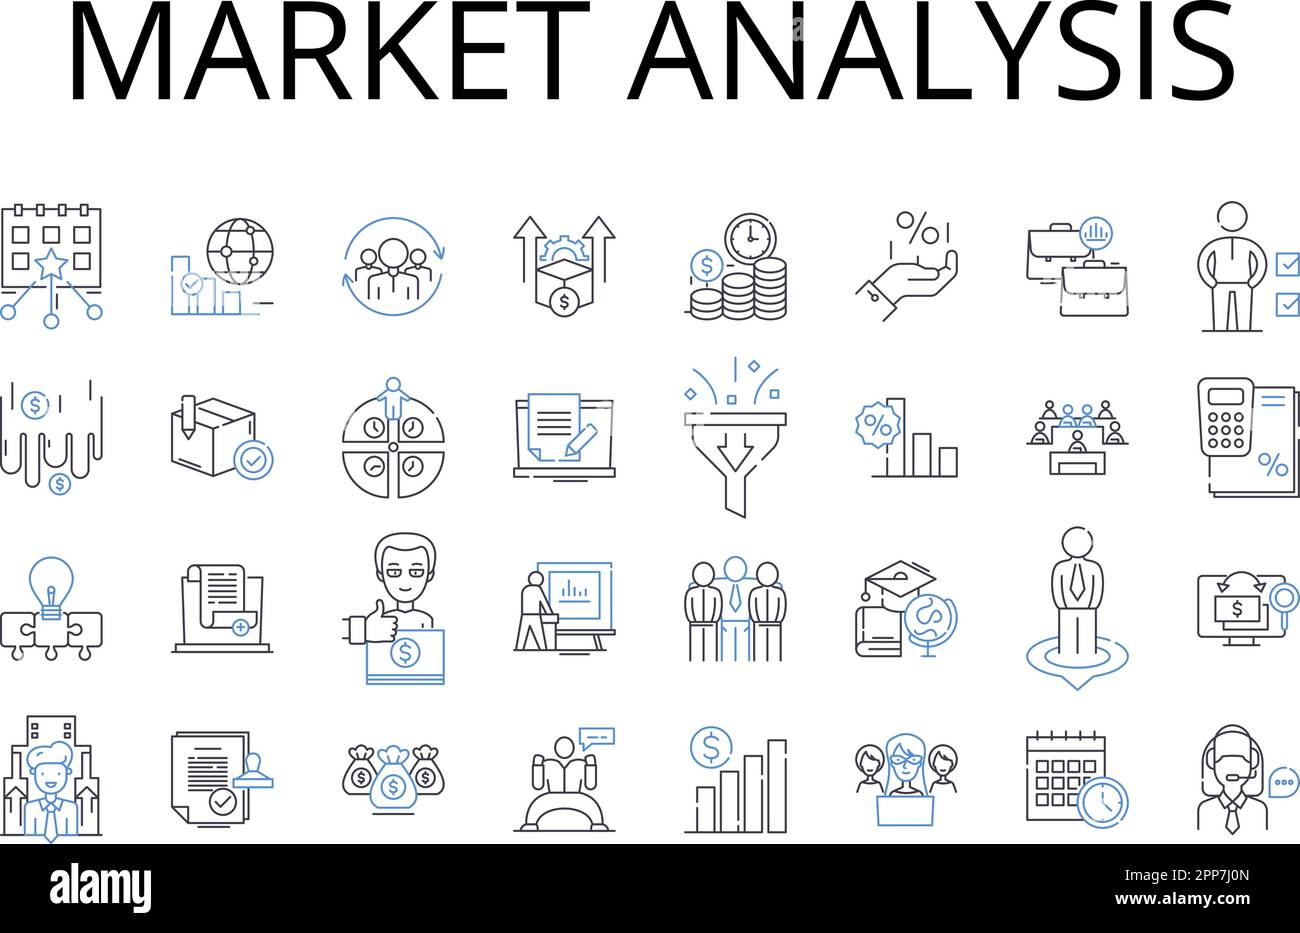 Market analysis line icons collection. Market research, Marketing analysis, Customer analysis, Industry analysis, Competitor analysis, Business Stock Vector